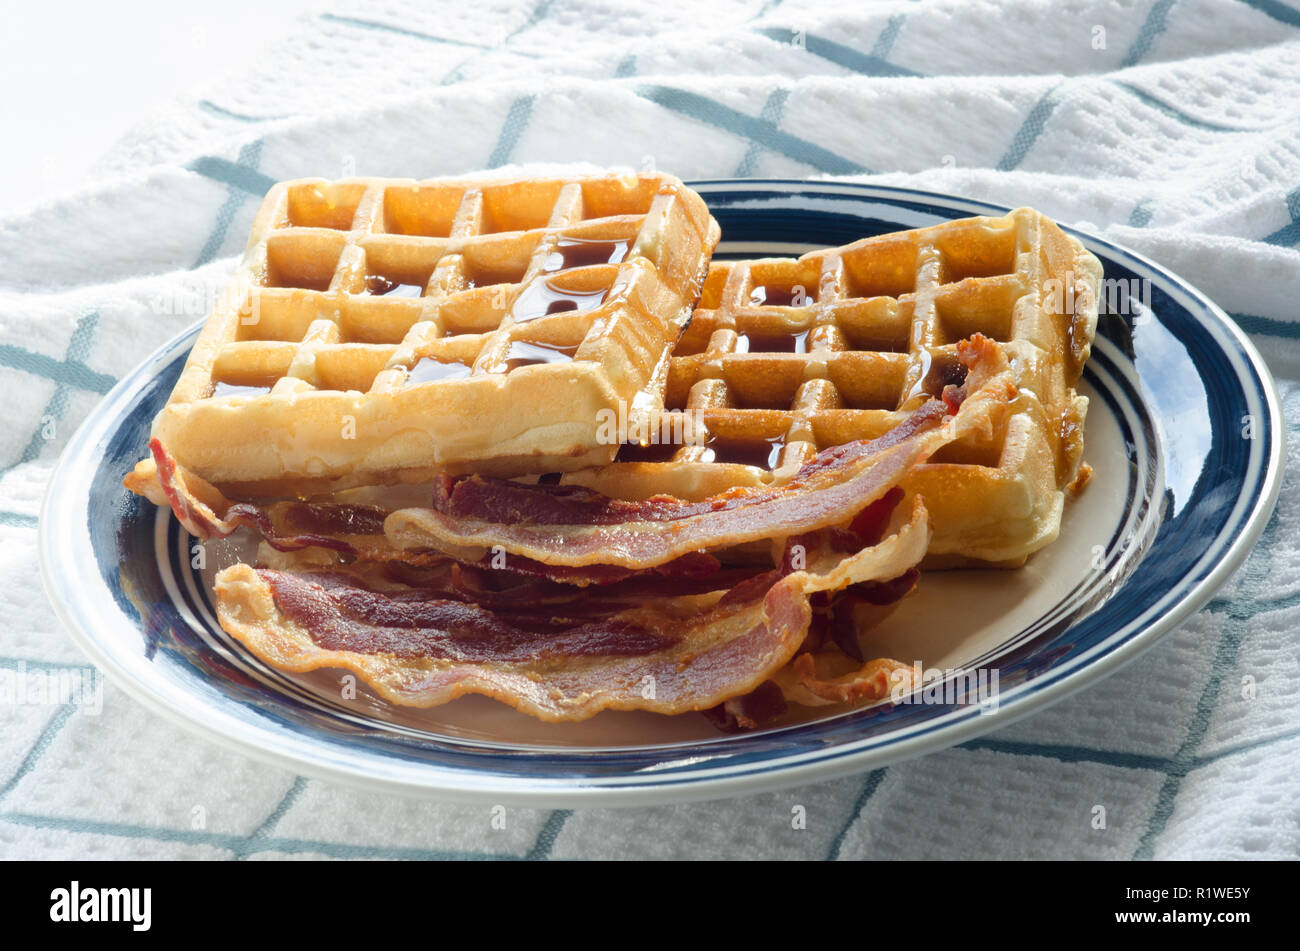 Plate of waffles, maple syrup and bacon Stock Photo